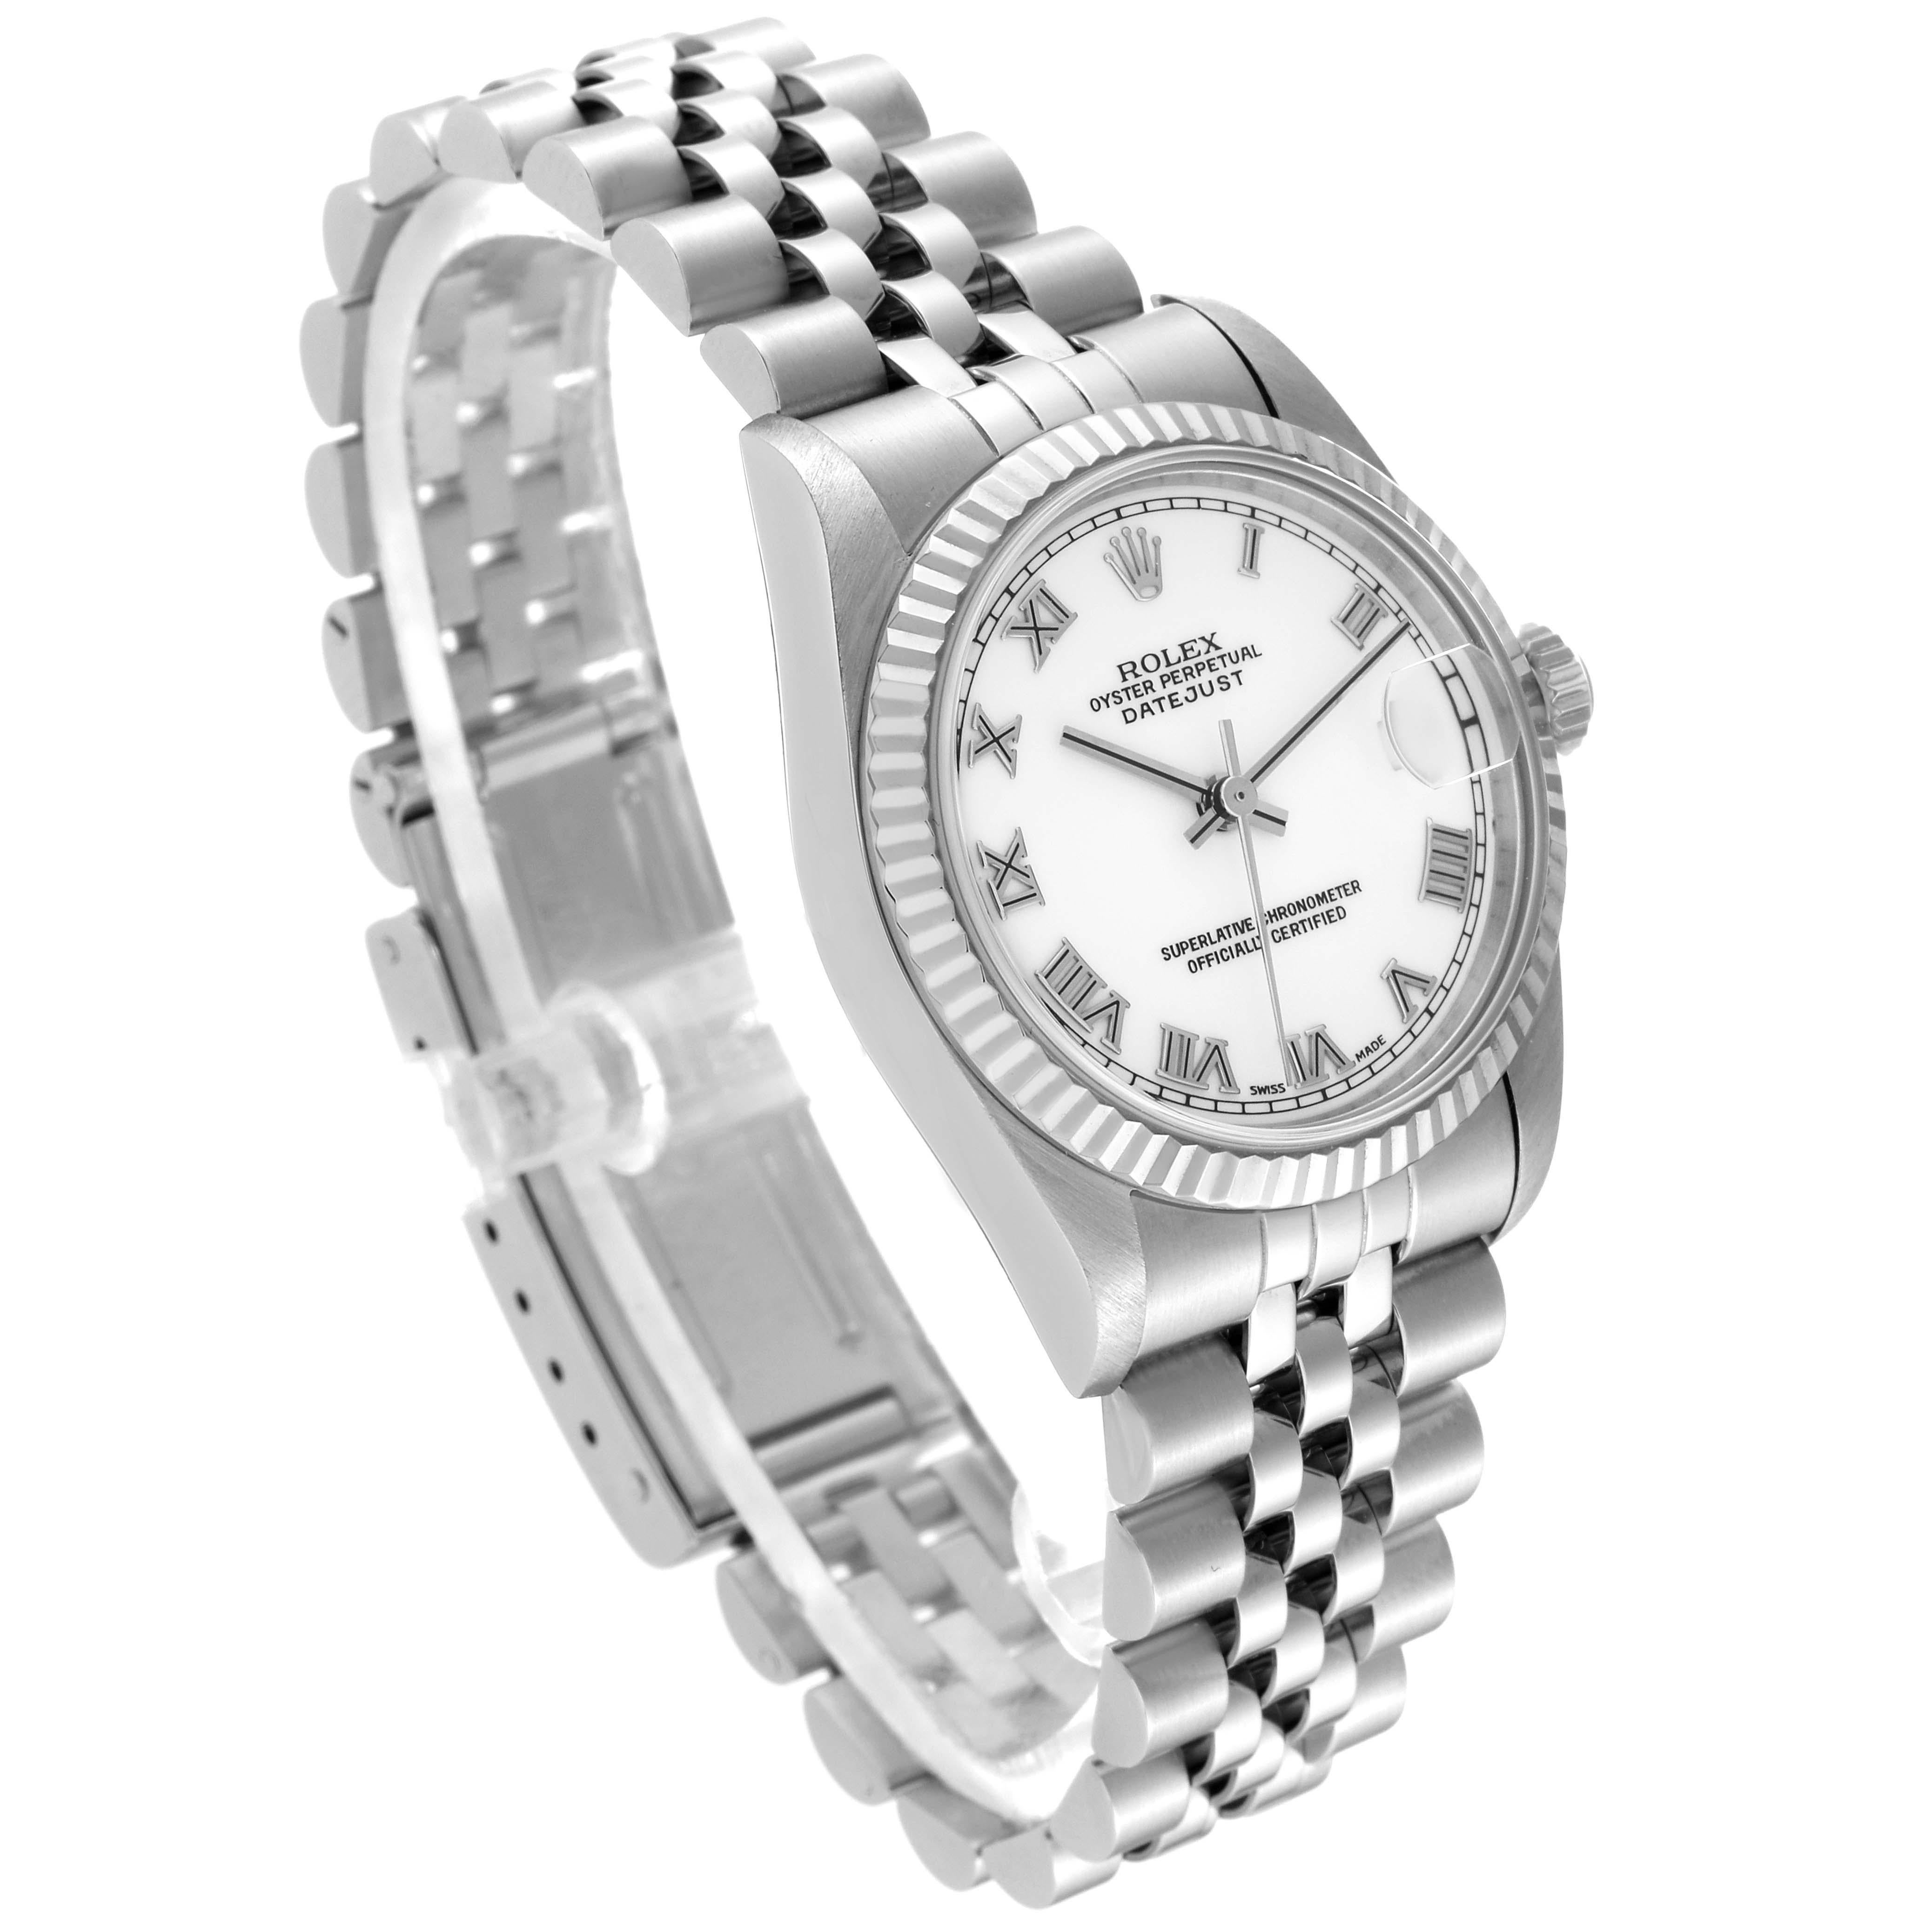 Rolex Datejust Midsize Steel White Gold Ladies Watch 68274. Officially certified chronometer automatic self-winding movement. Stainless steel oyster case 31.0 mm in diameter. Rolex logo on the crown. 18k white gold fluted bezel. Scratch resistant